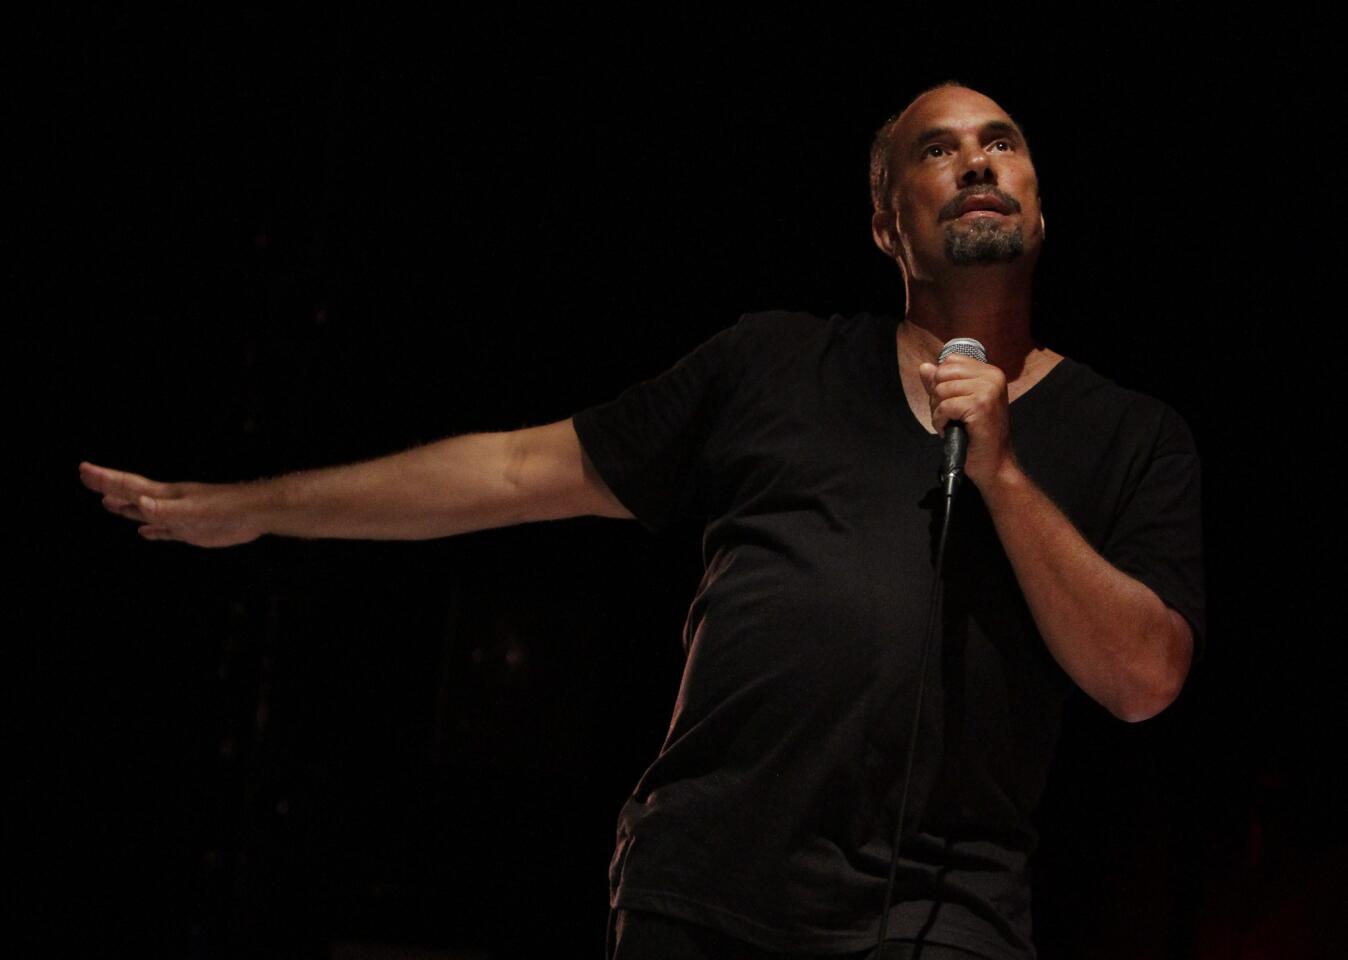 In "Rodney King" at the Douglas, Roger Guenveur Smith created a spoken-word portrait balancing empathy and truth.